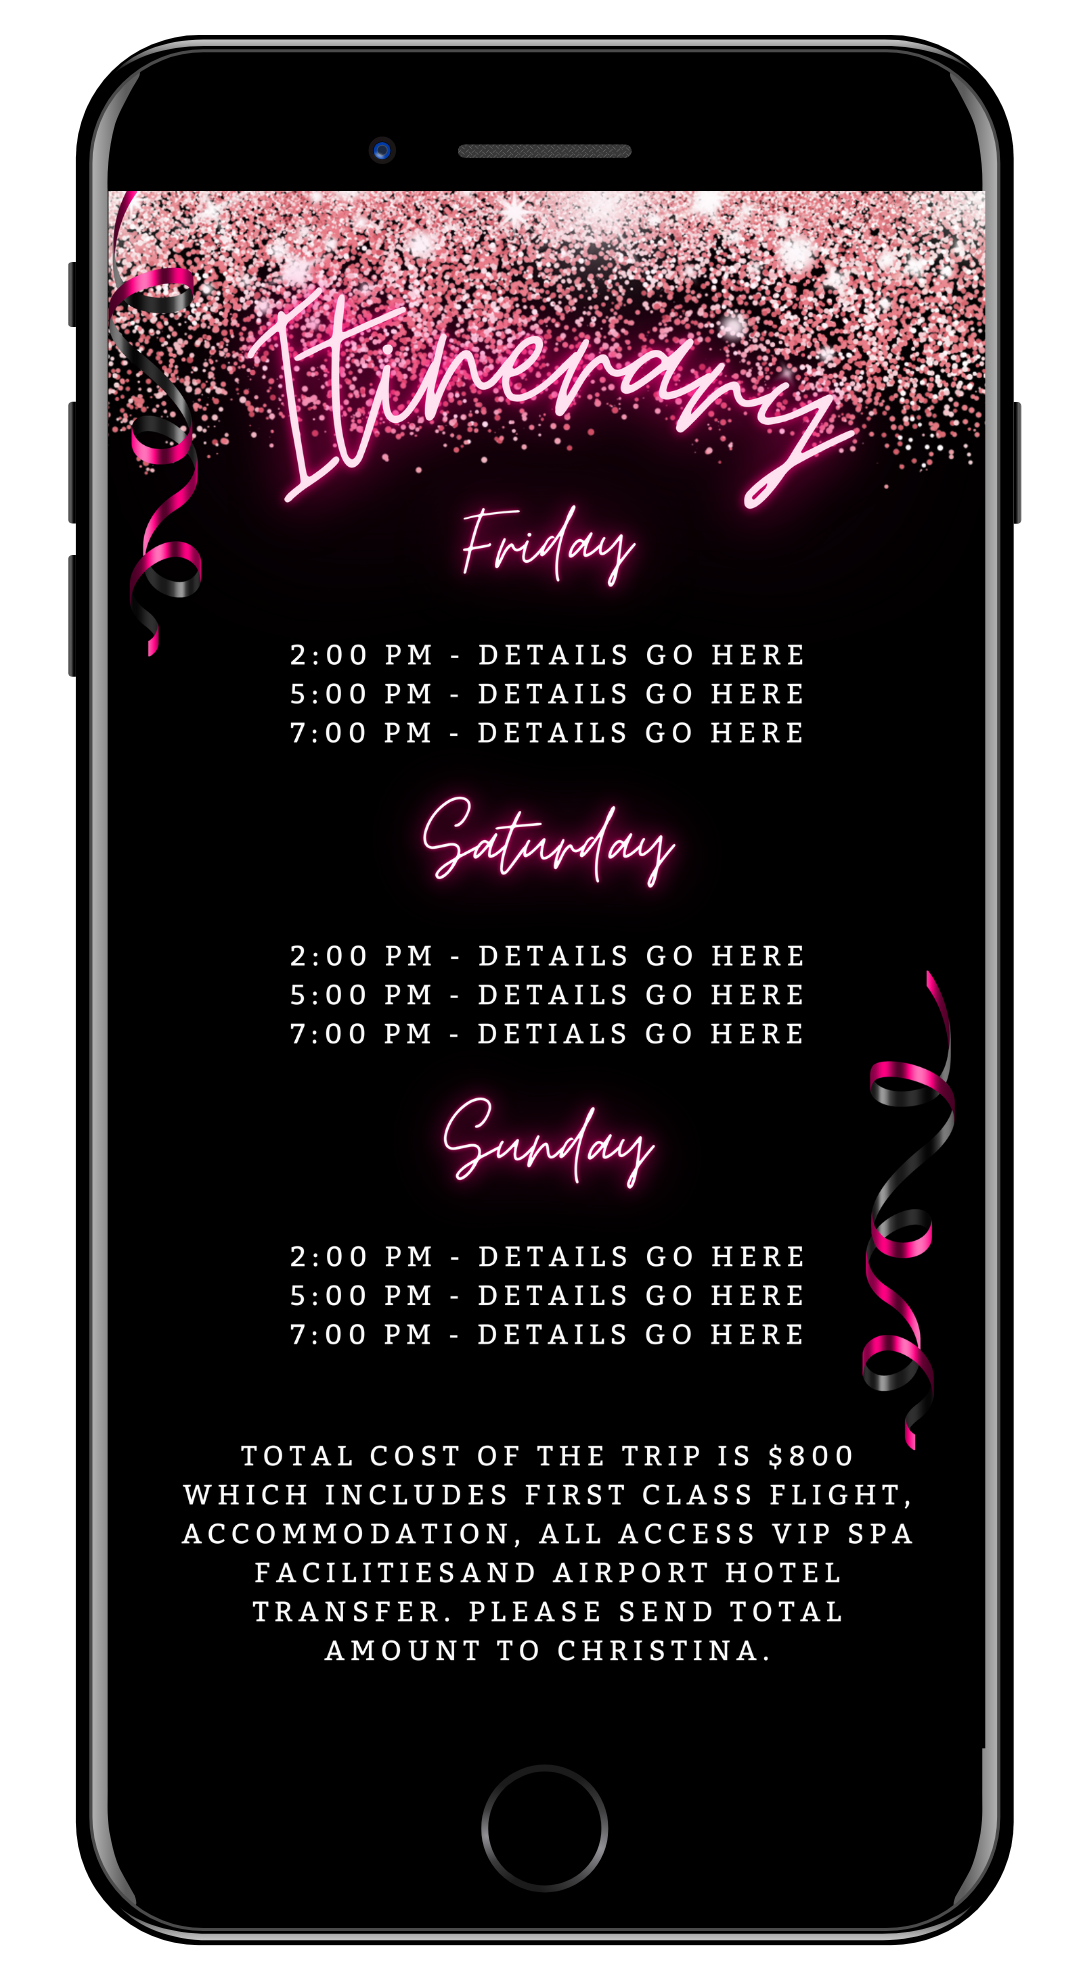 Customisable digital invitation template for a Weekend Party Evite, featuring neon pink glitter confetti with editable text using Canva, perfect for smartphones.